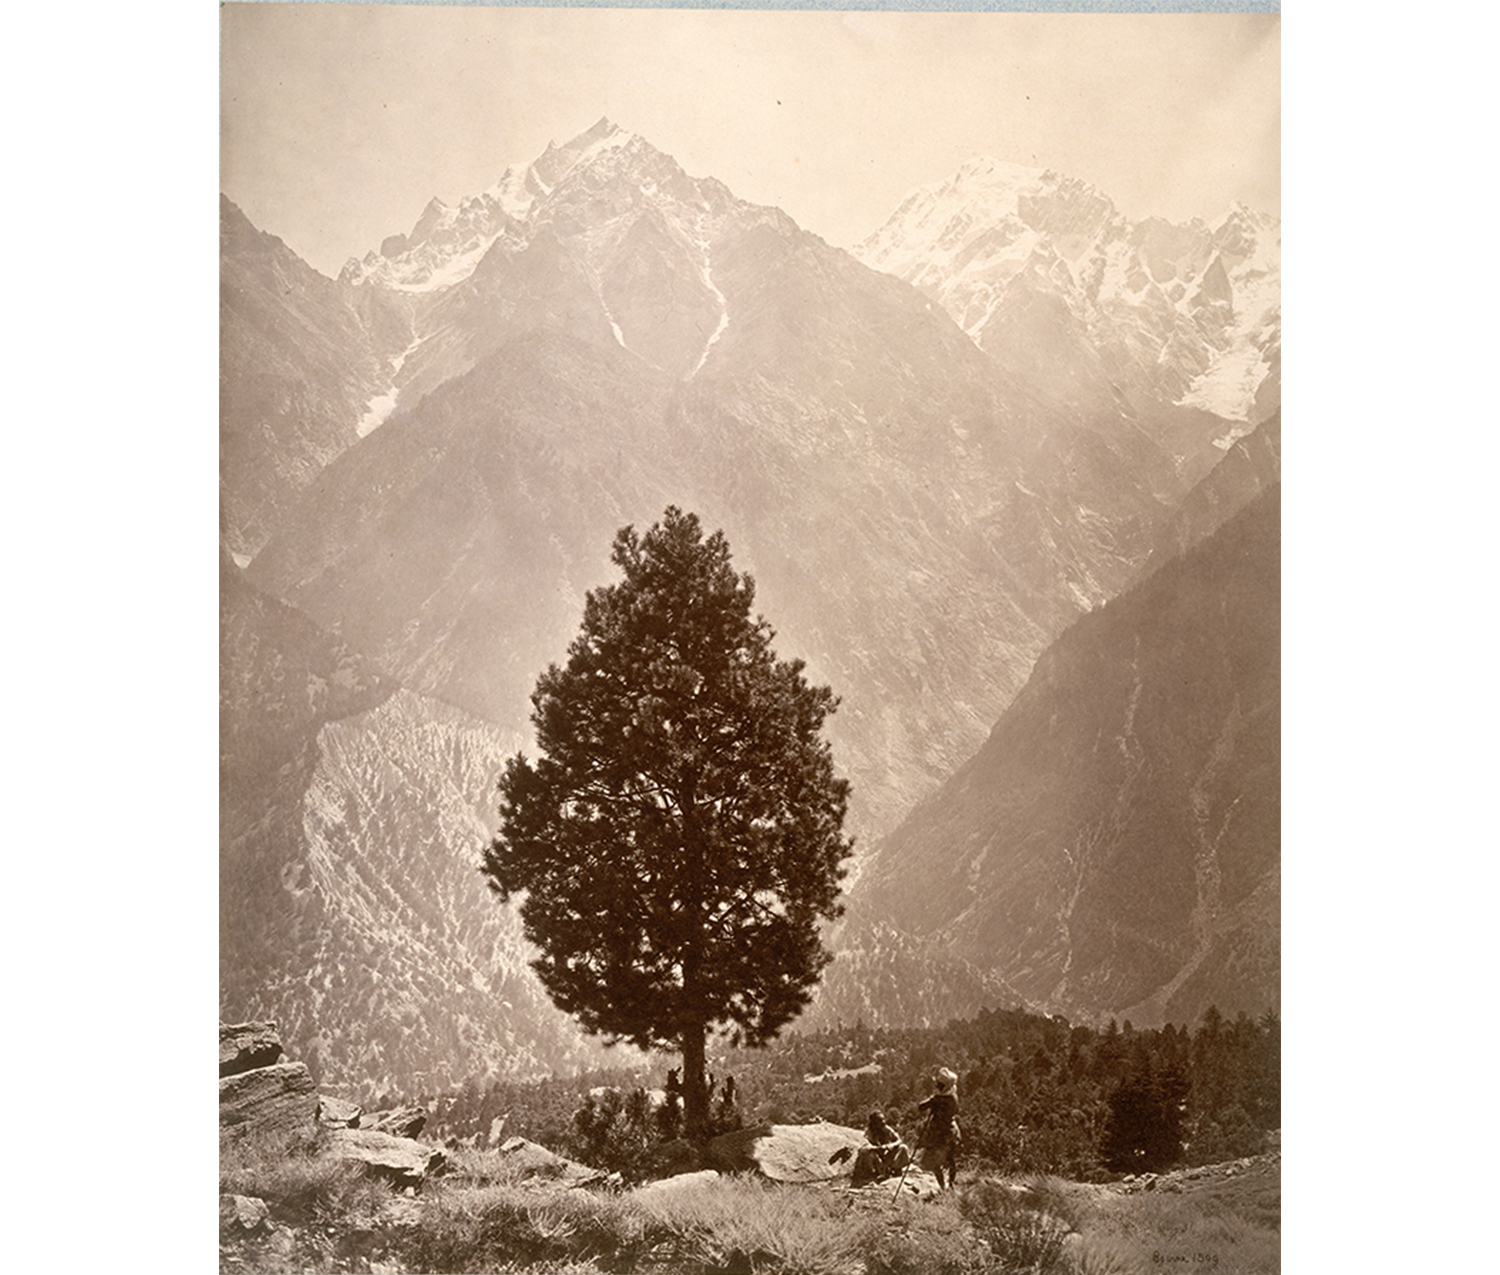 black and white image of lone pine tree with mountains in background and two figures underneath